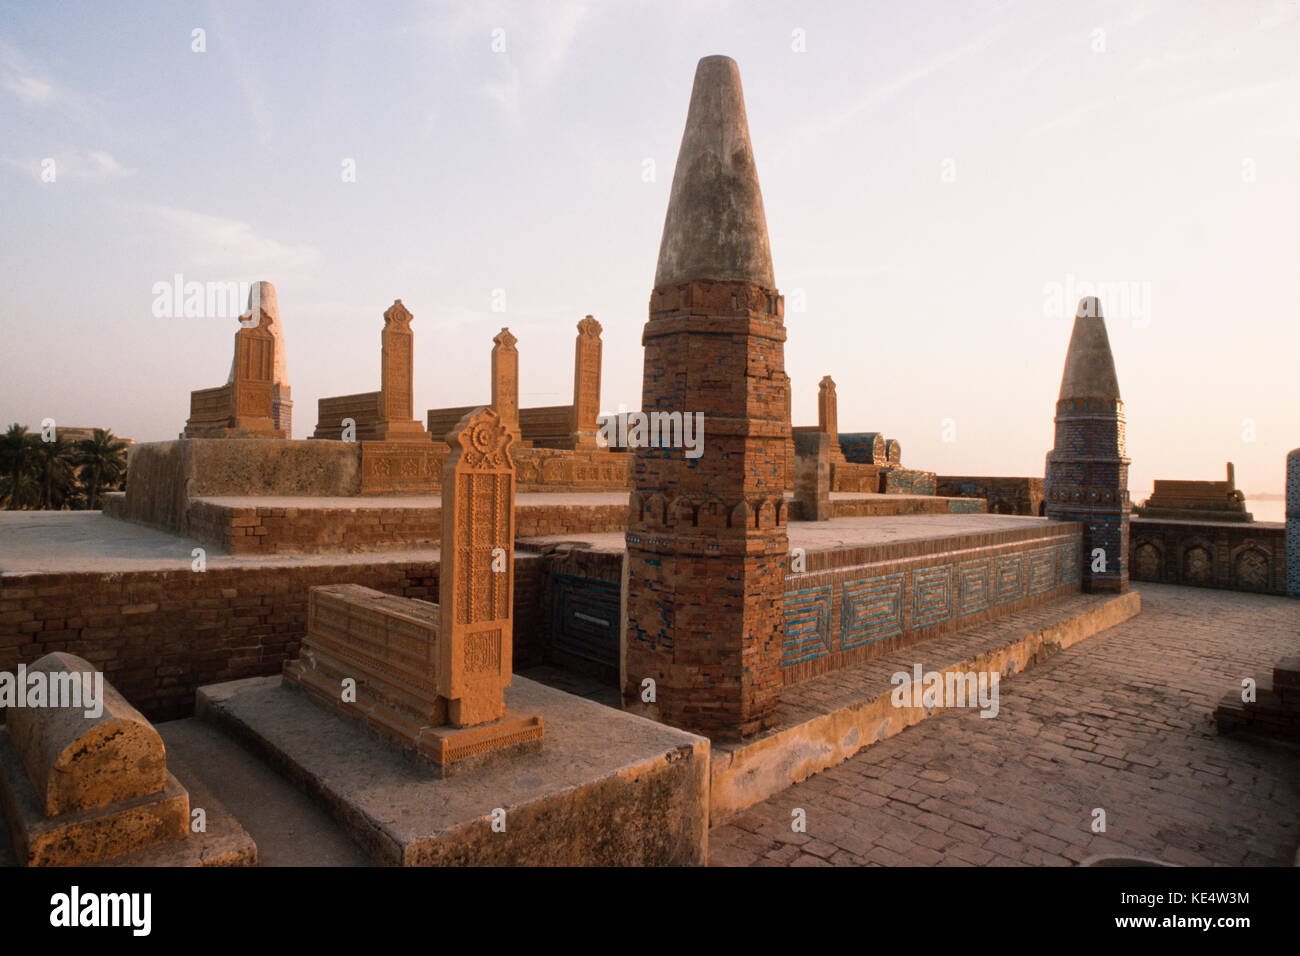 Elaborate ceramic and stone carvings at the Moghul graveyards at Chaukhandi overlooking the River Indus Stock Photo